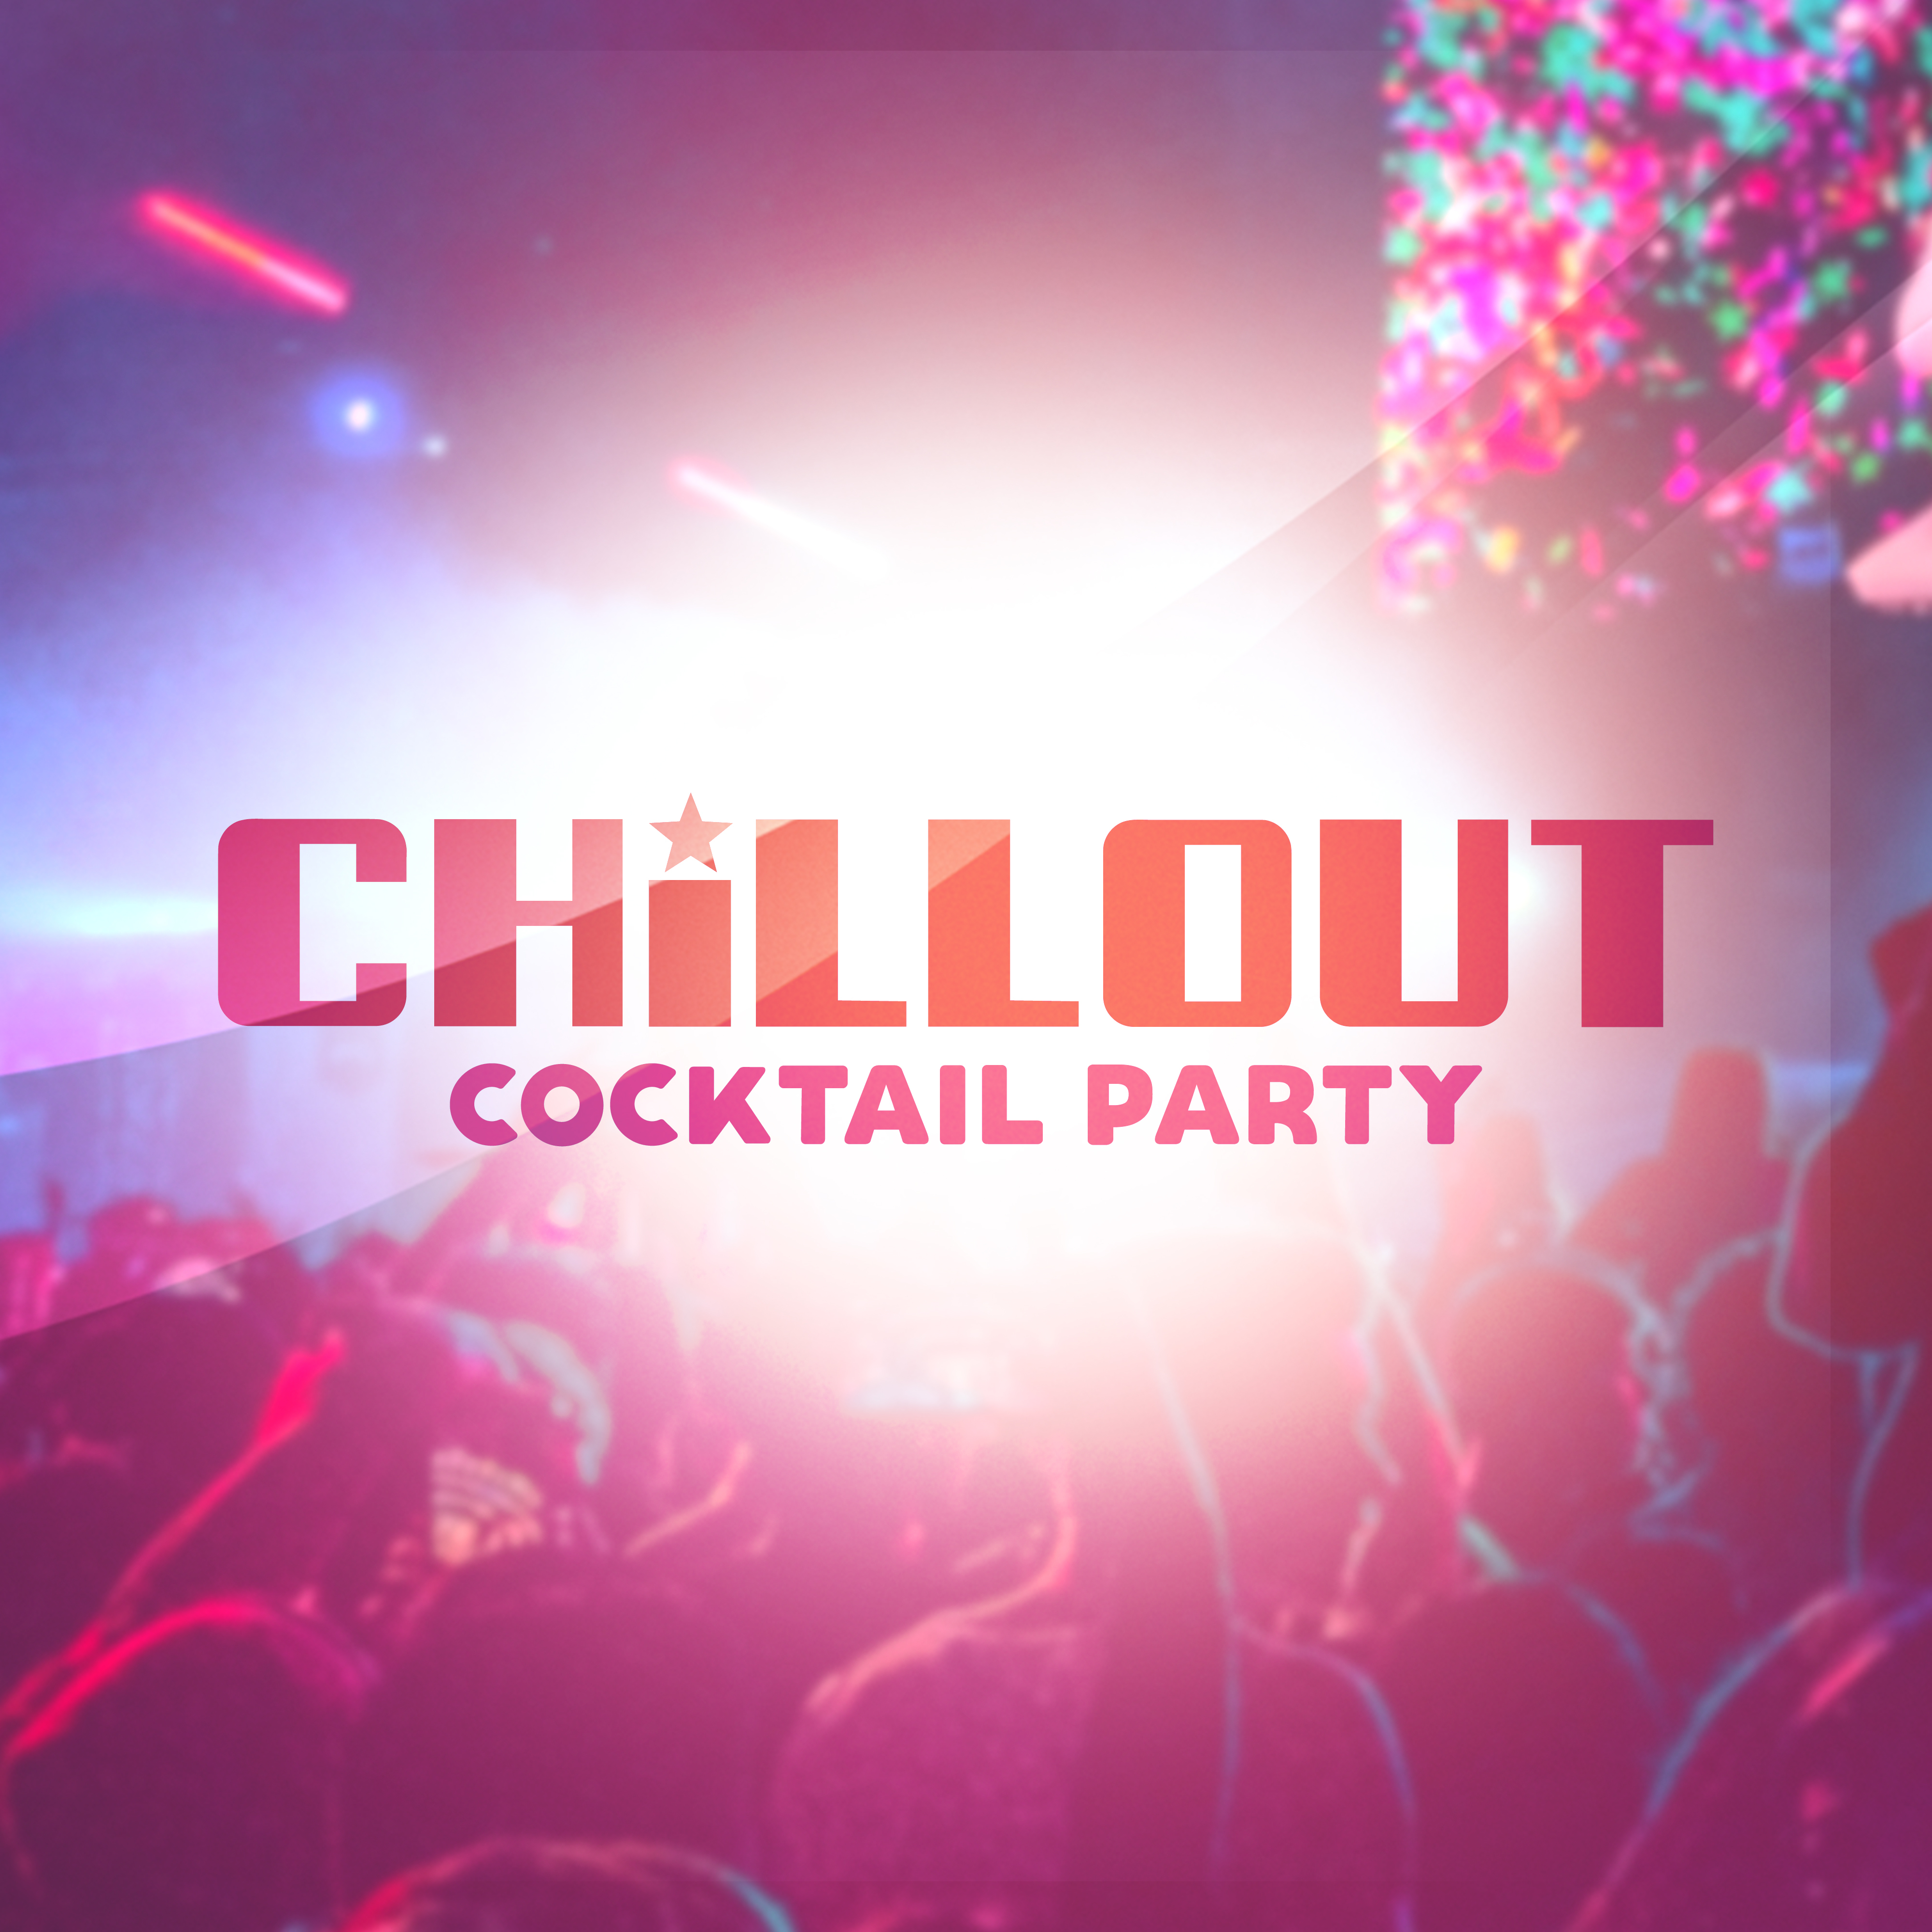 Chillout Cocktail Party